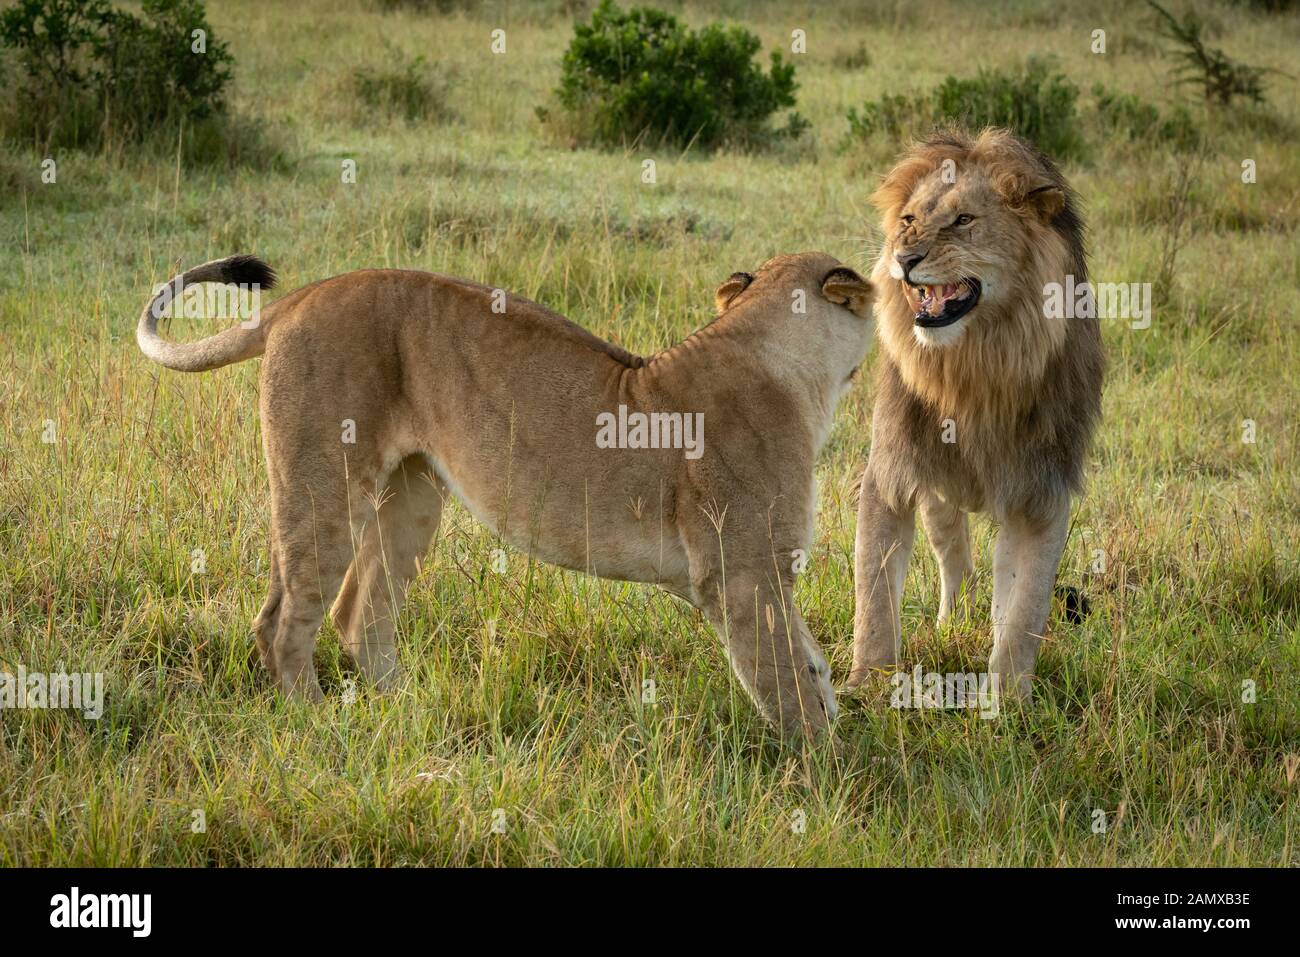 Lion stands growling at lioness in grass Stock Photo - Alamy